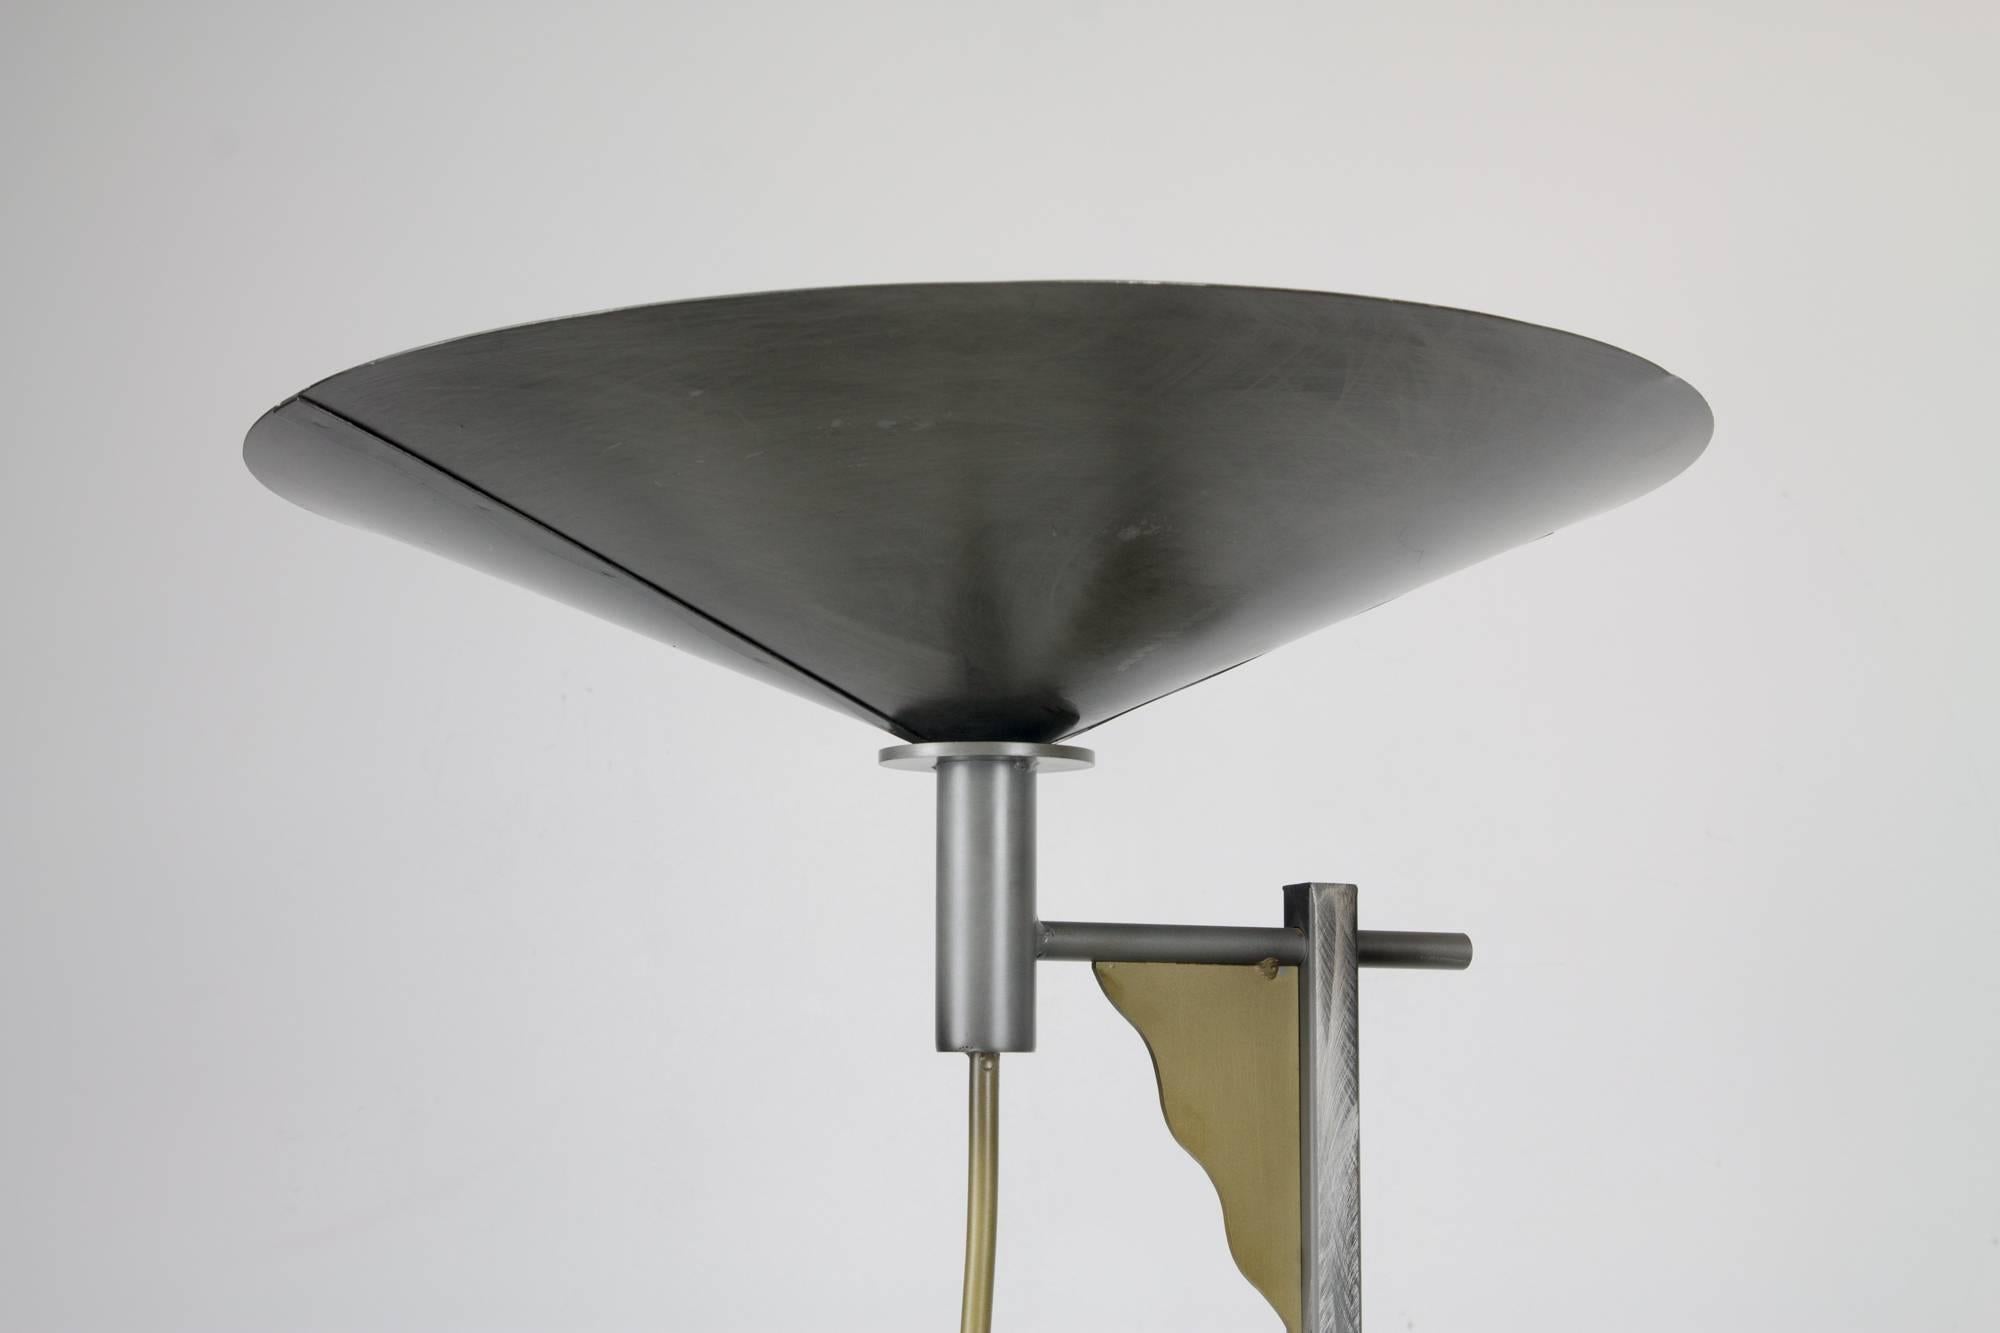 Very rare Postmodern floor lamp by Robert Sonneman for Kovacs comprised of welded elements of steel, brass and copper.